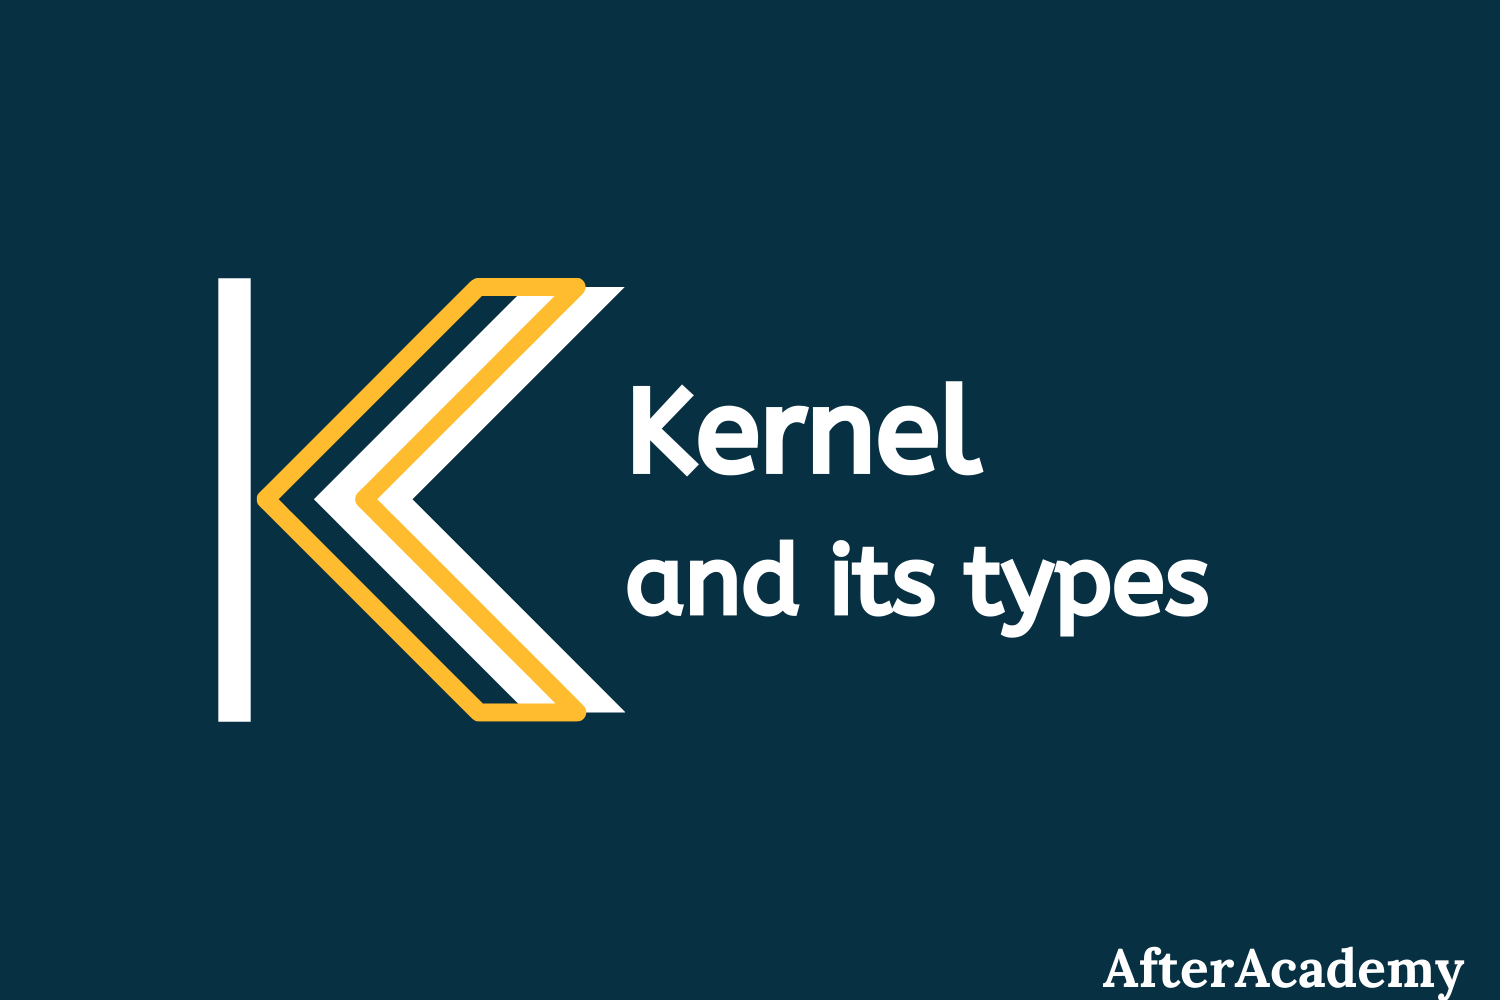 What is Kernel in Operating System and what are the various types of Kernel?